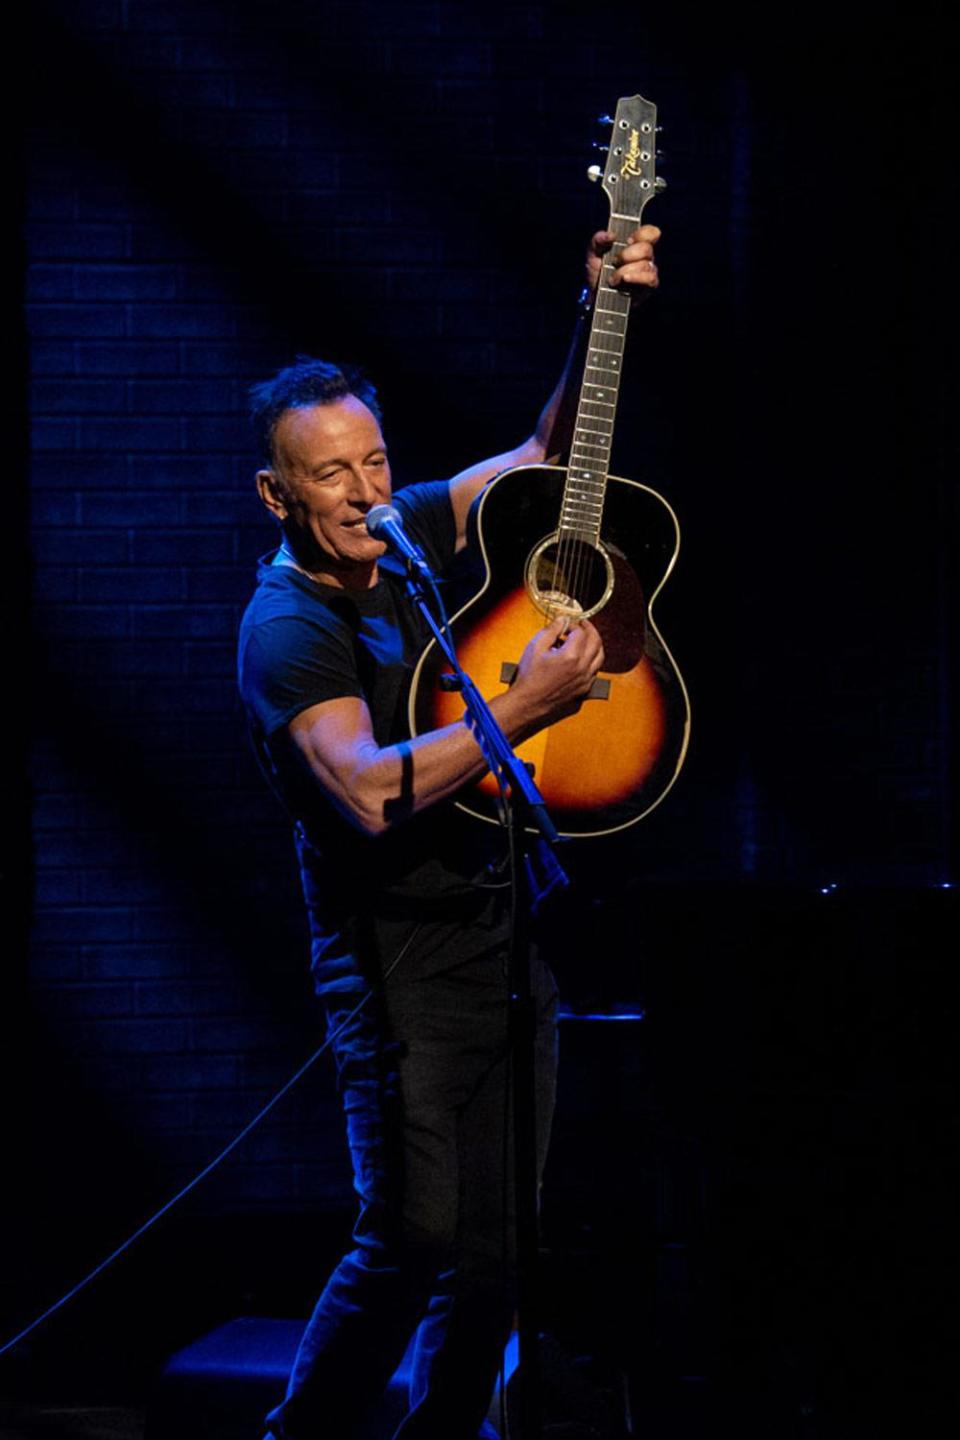 Entrancing in the dark: Bruce Springsteen shows his power as a storyteller at Walter Kerr Theatre (Netflix/Kevin Mazur)